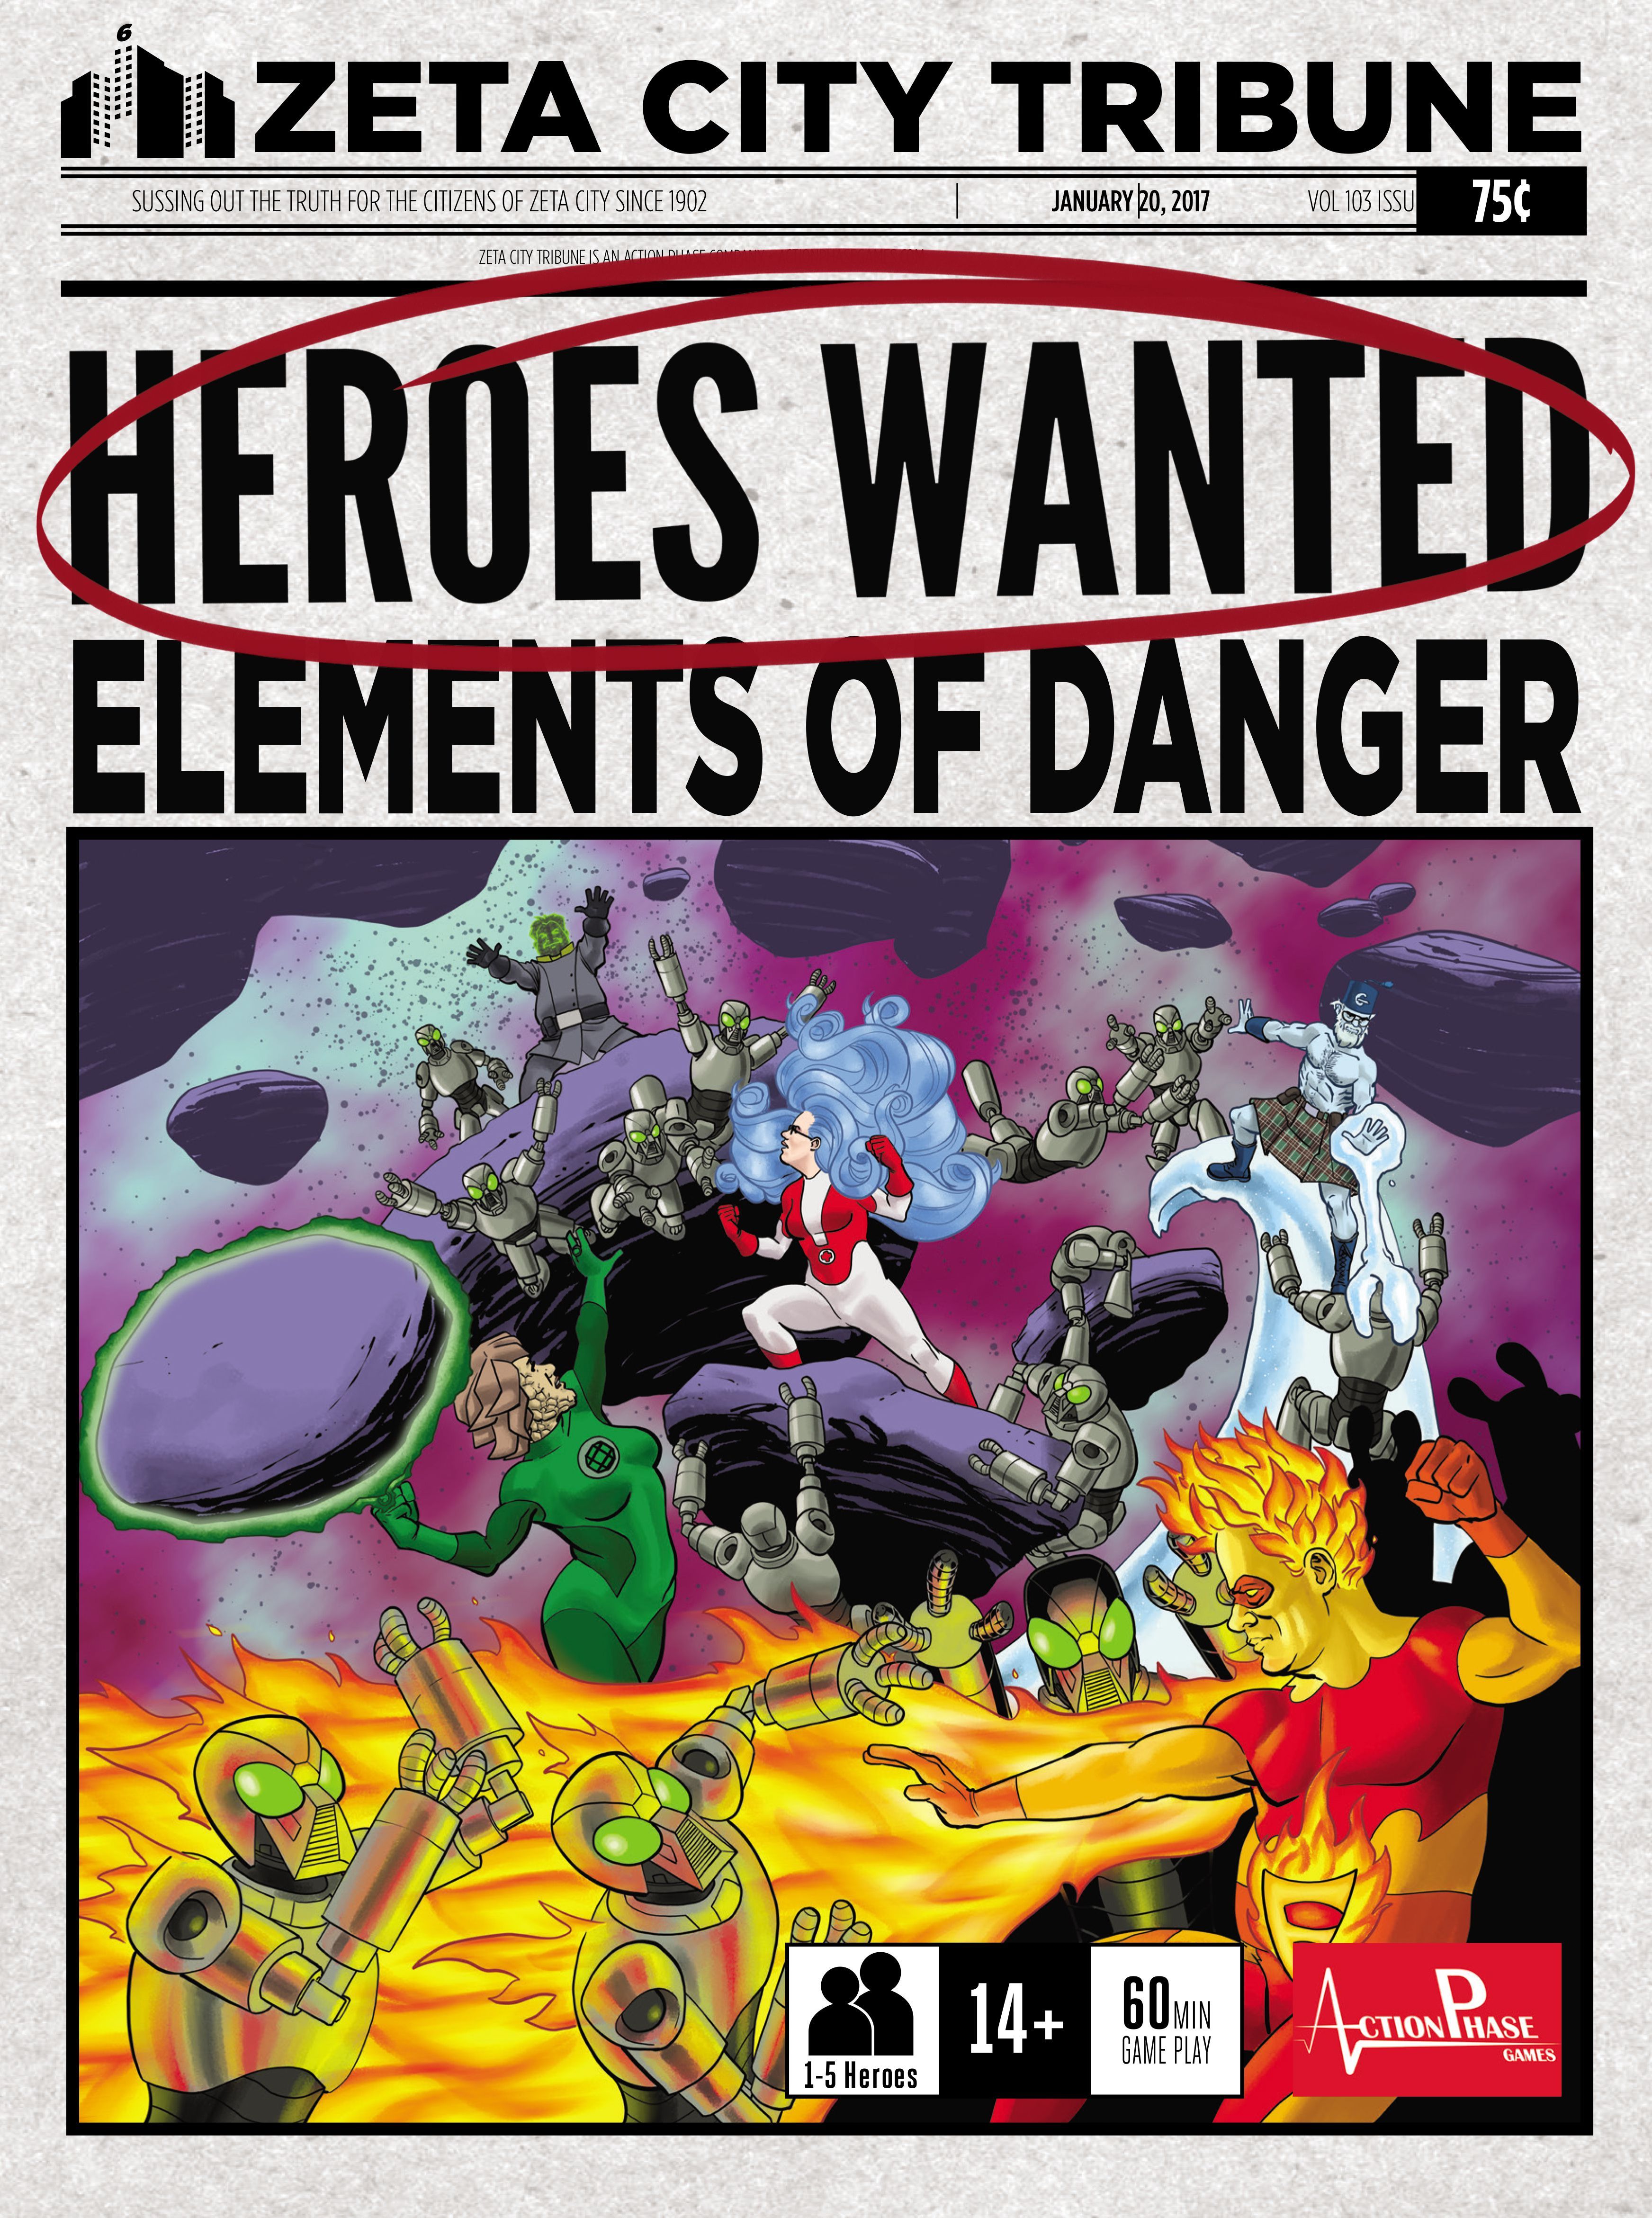 Heroes Wanted: Elements of Danger